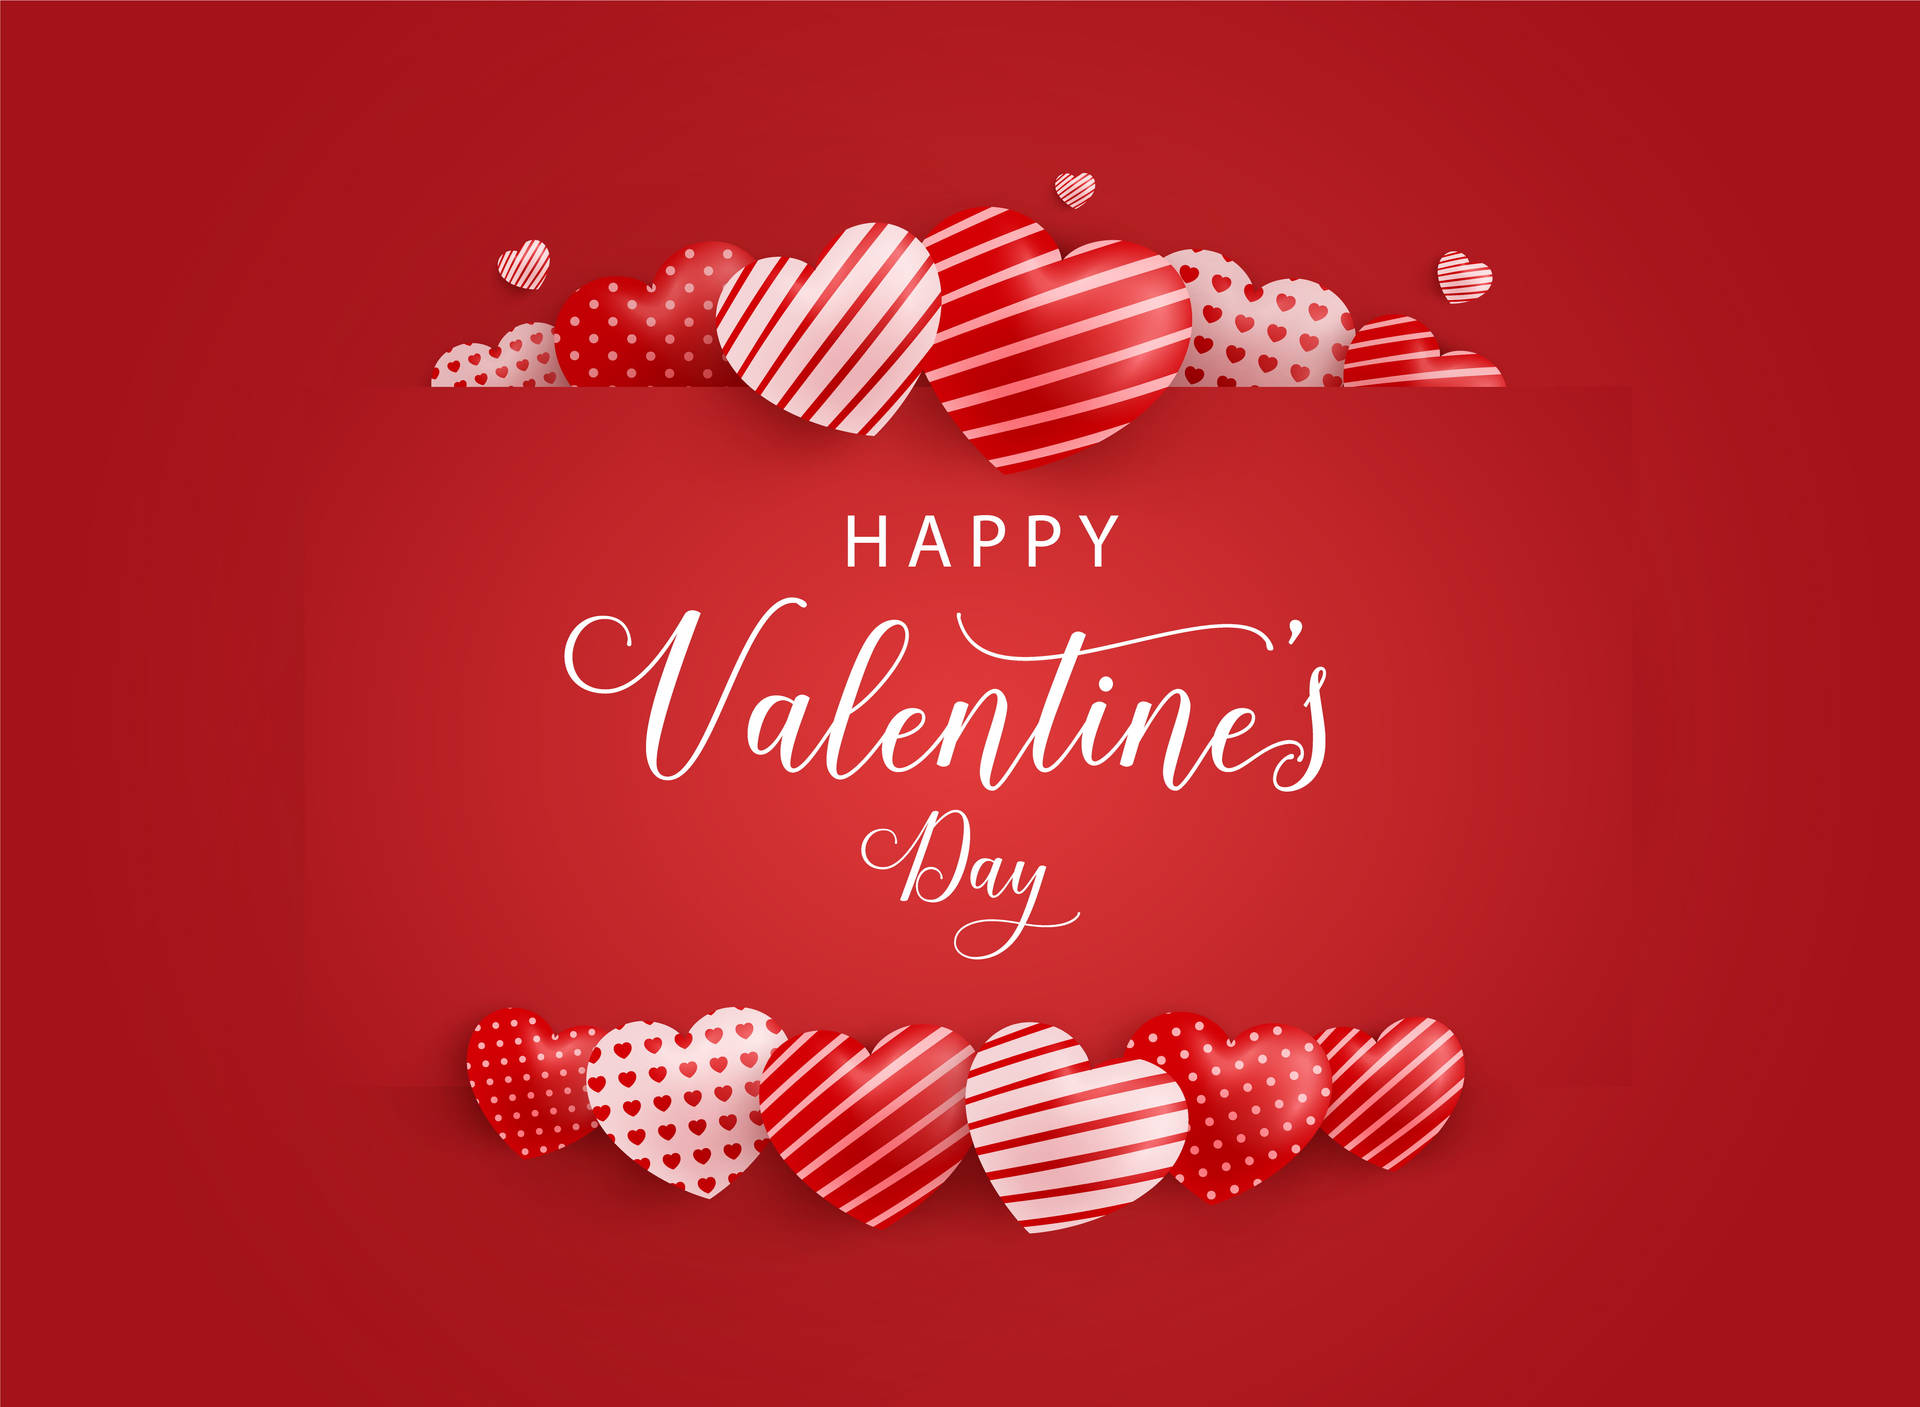 Happy Valentine’s Day Patterned Hearts Background